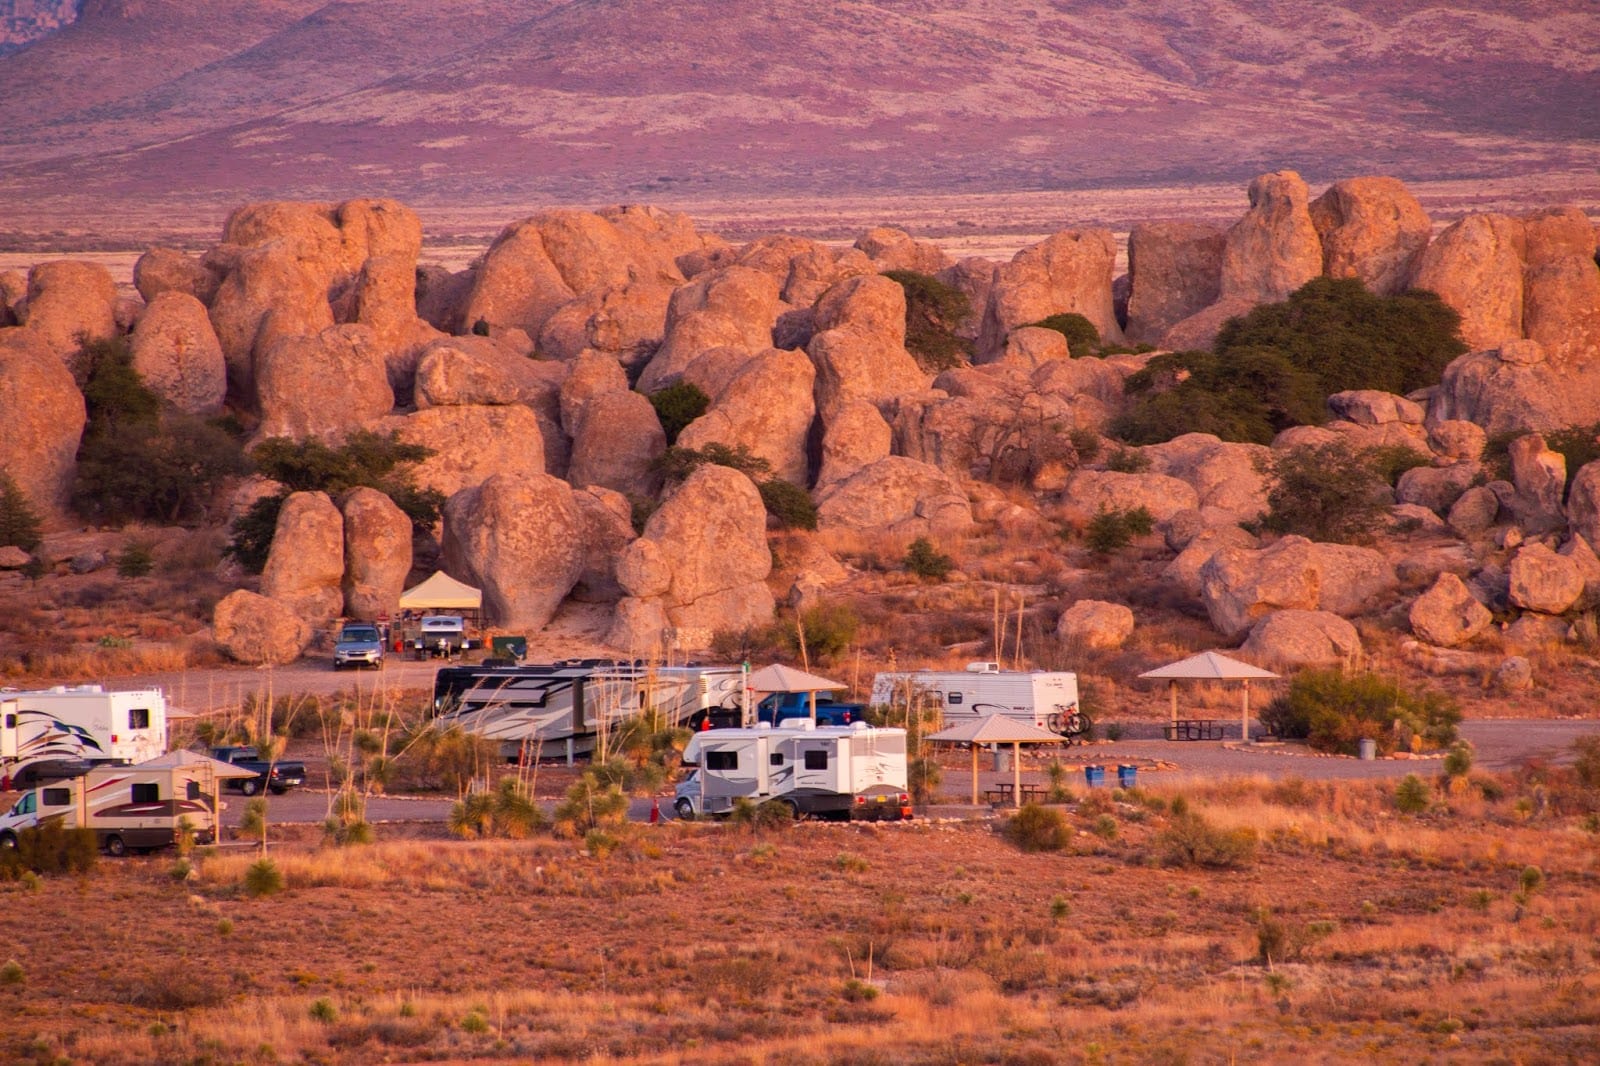 10 BEST Camping Sites in NEW MEXICO You Should Visit in 2021